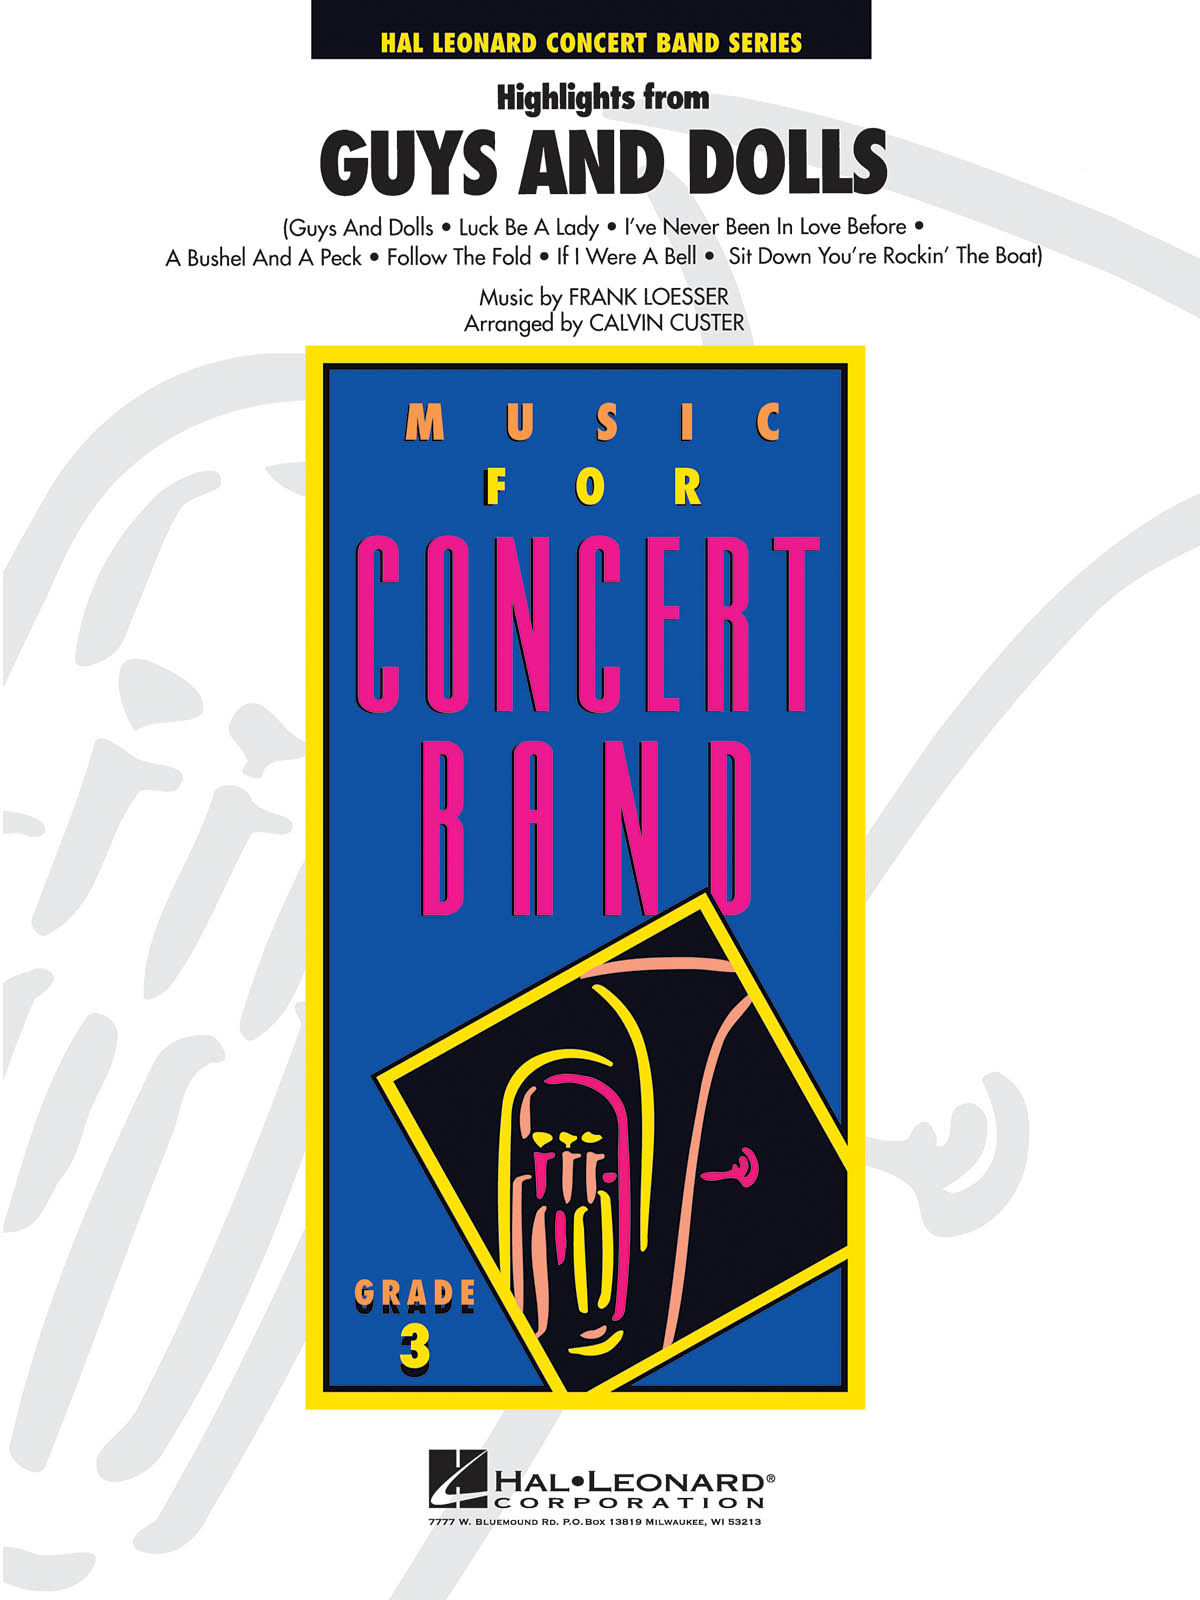 Frank Loesser: Highlights from Guys And Dolls: Concert Band: Score & Parts